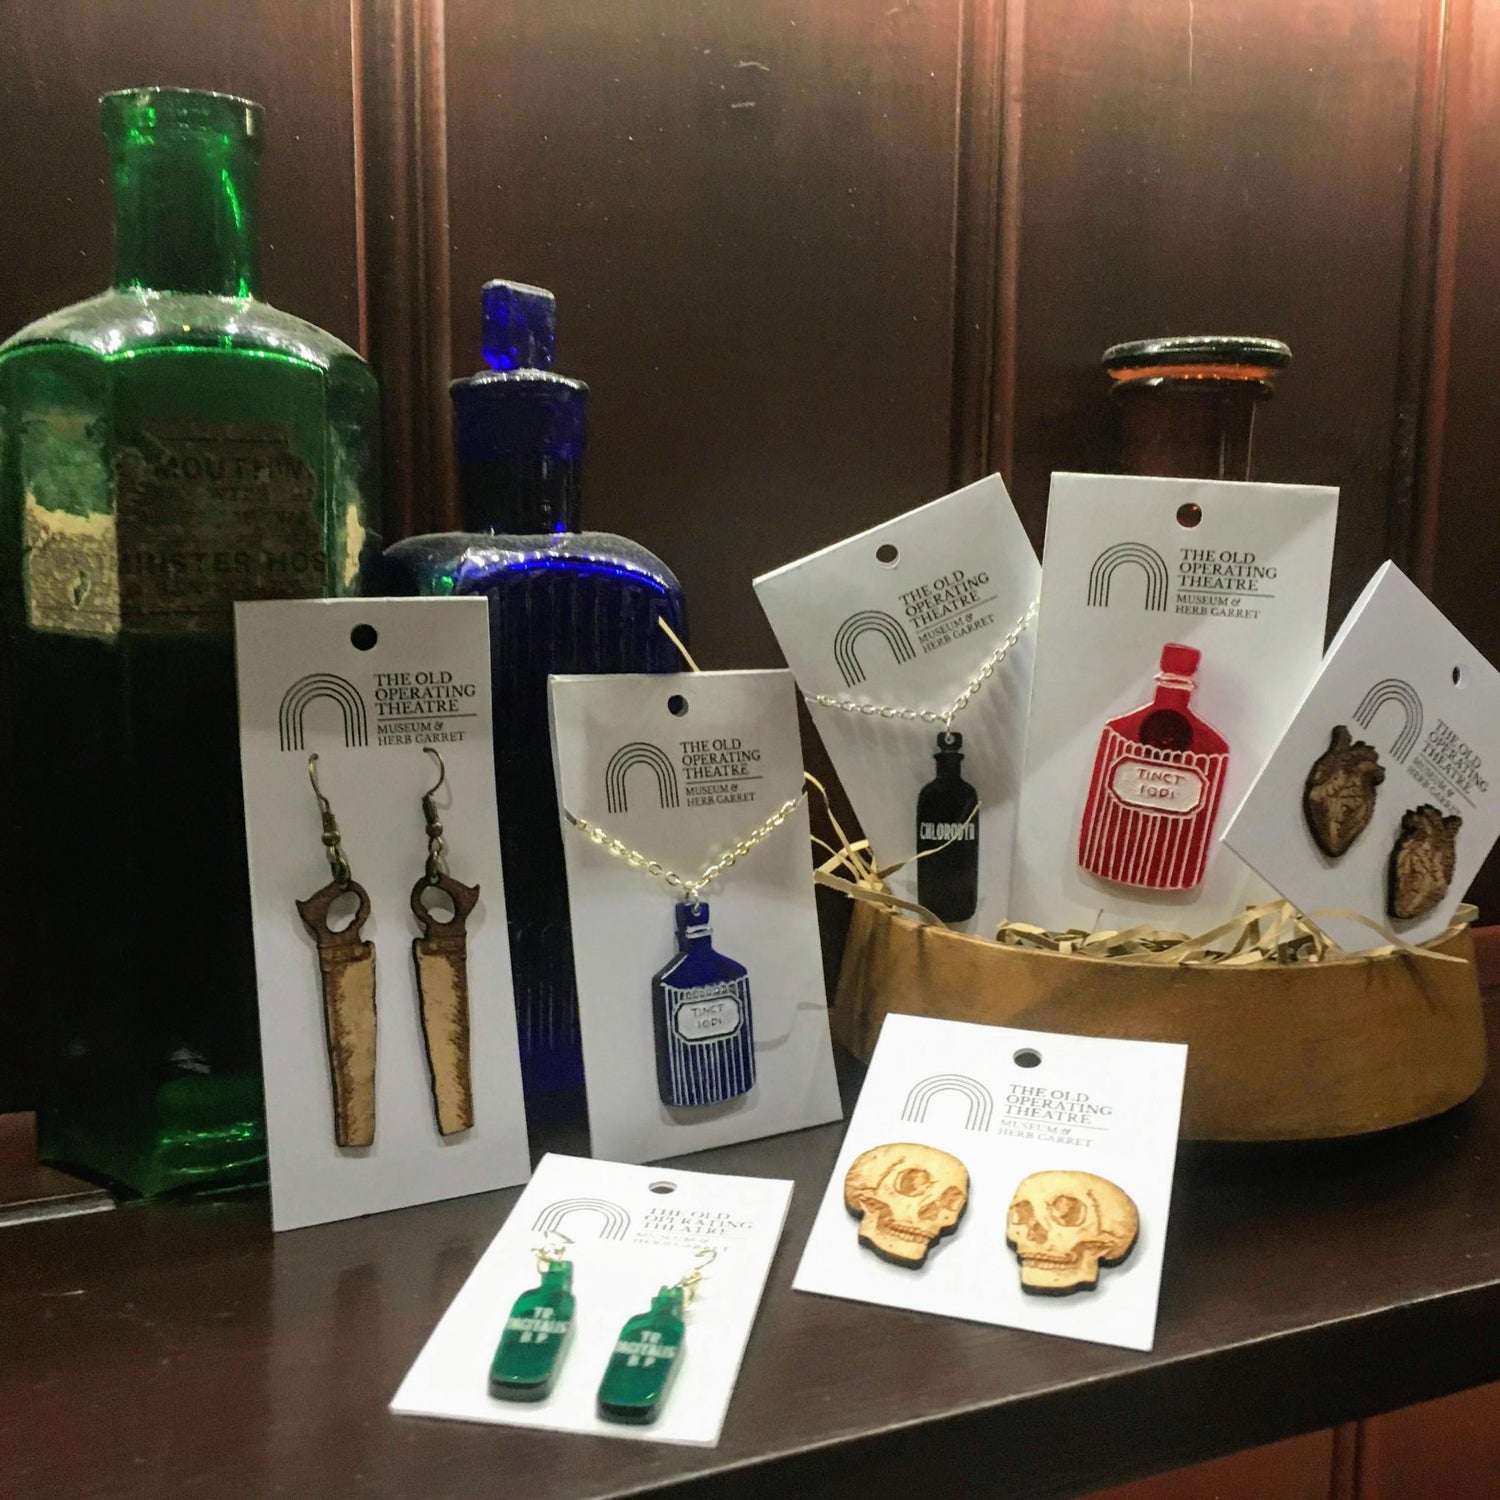 A selection of jewellery, including bonesaw earrings, apothecary bottle necklaces, skull and heart earrings, and bottle earrings,  placed in front of blue, green and amber glass bottles